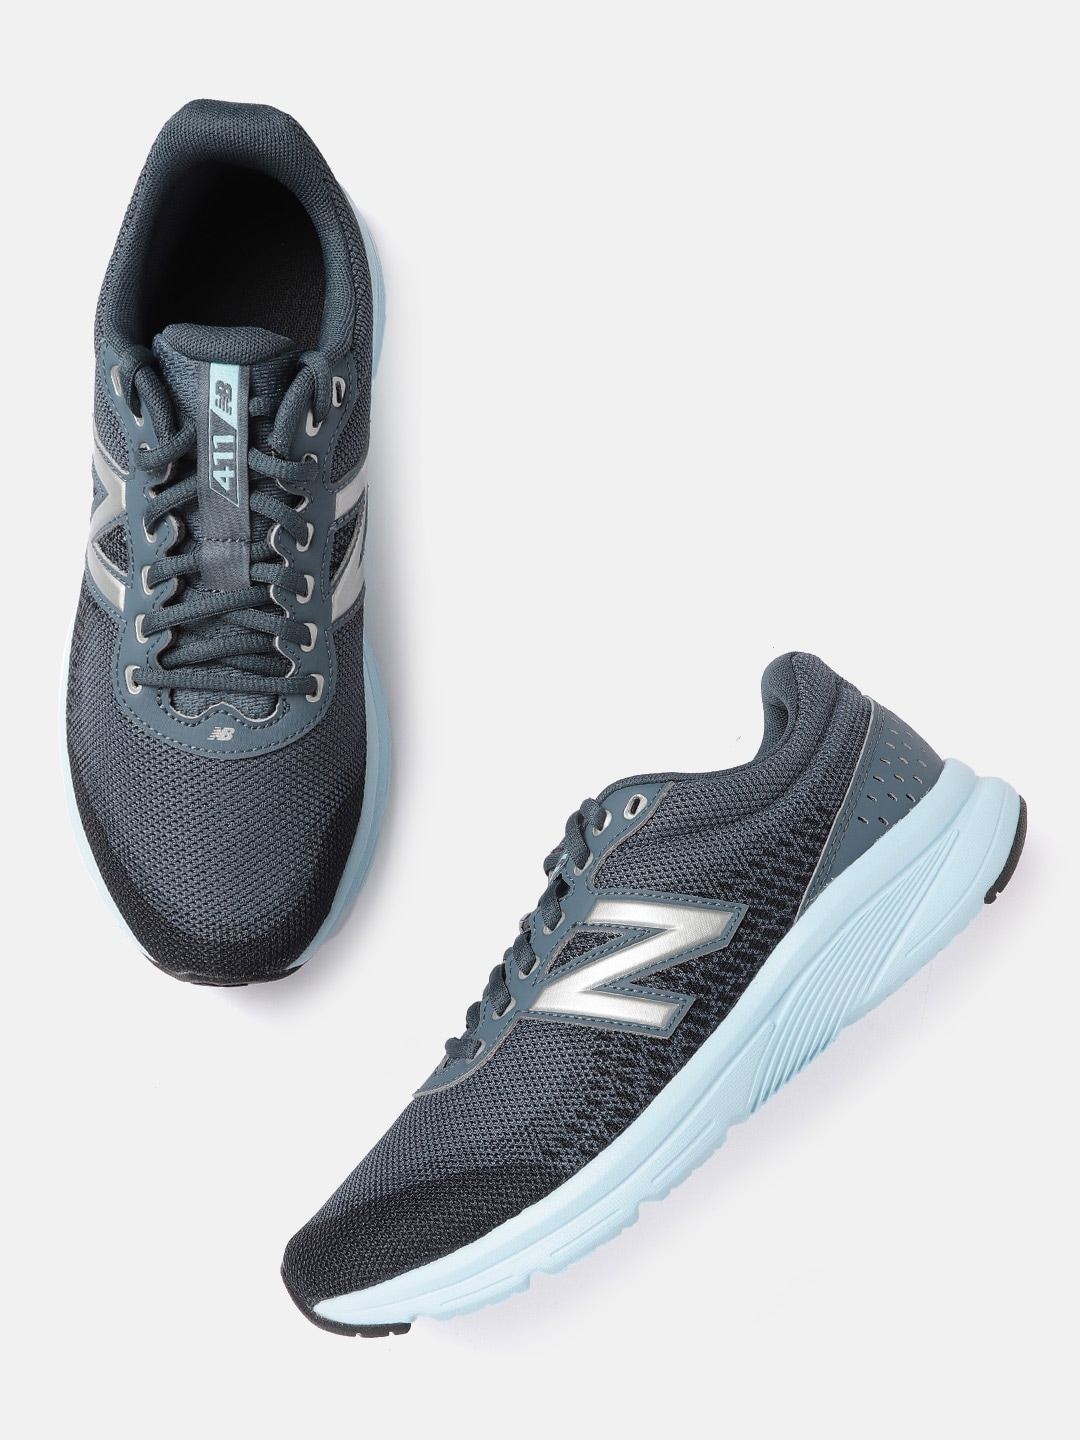 New Balance Women Grey & Blue Woven Design Perforated Running Shoes Price in India